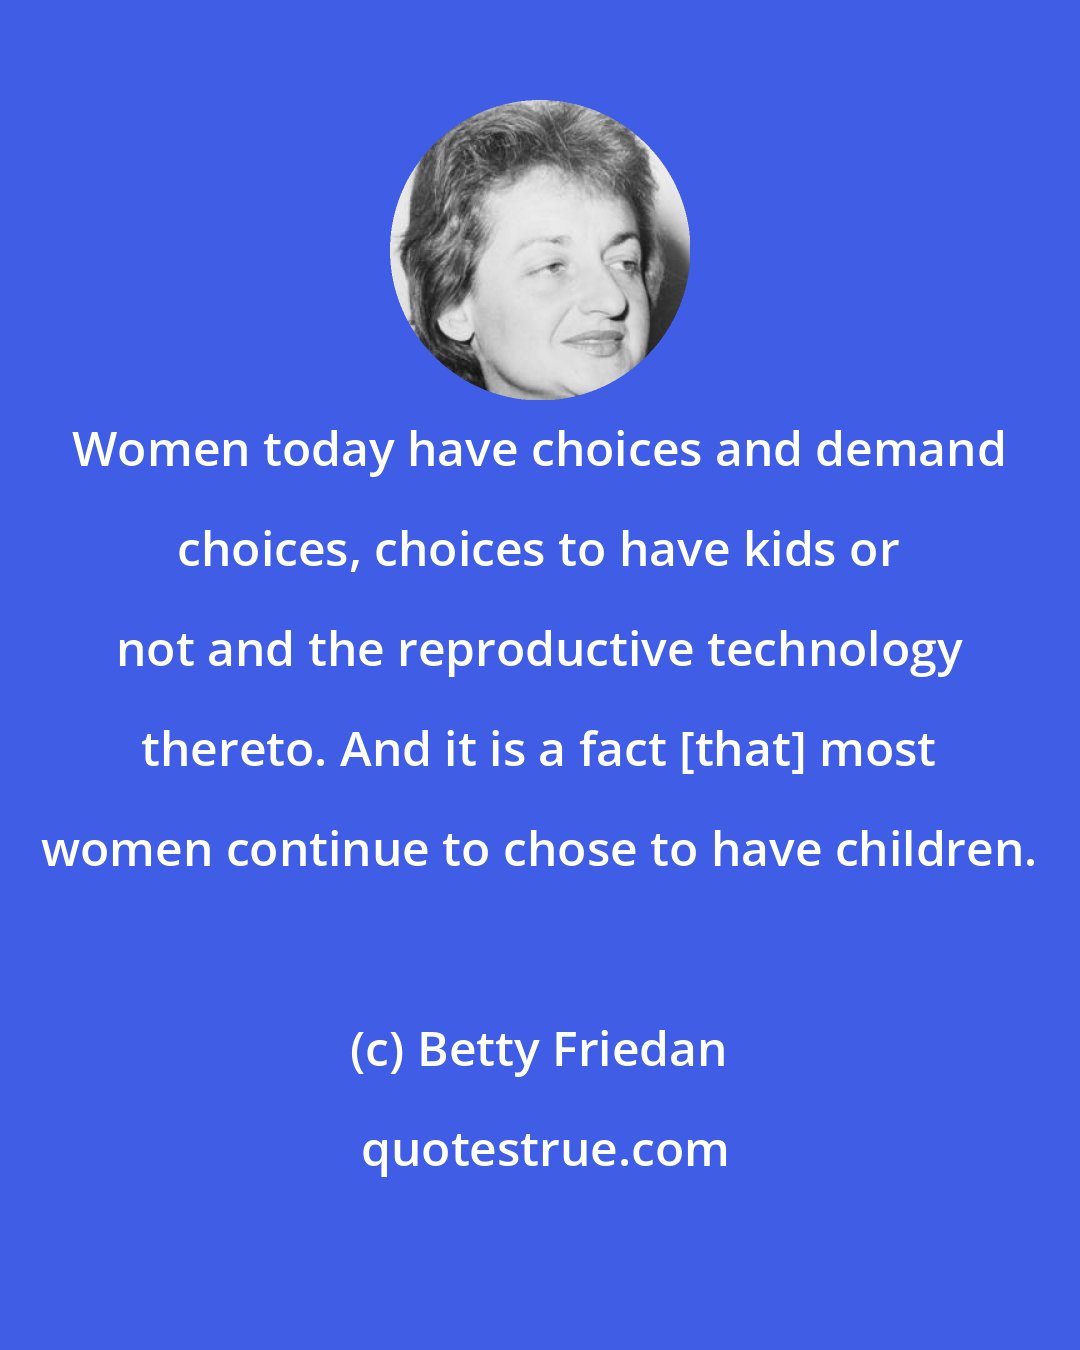 Betty Friedan: Women today have choices and demand choices, choices to have kids or not and the reproductive technology thereto. And it is a fact [that] most women continue to chose to have children.